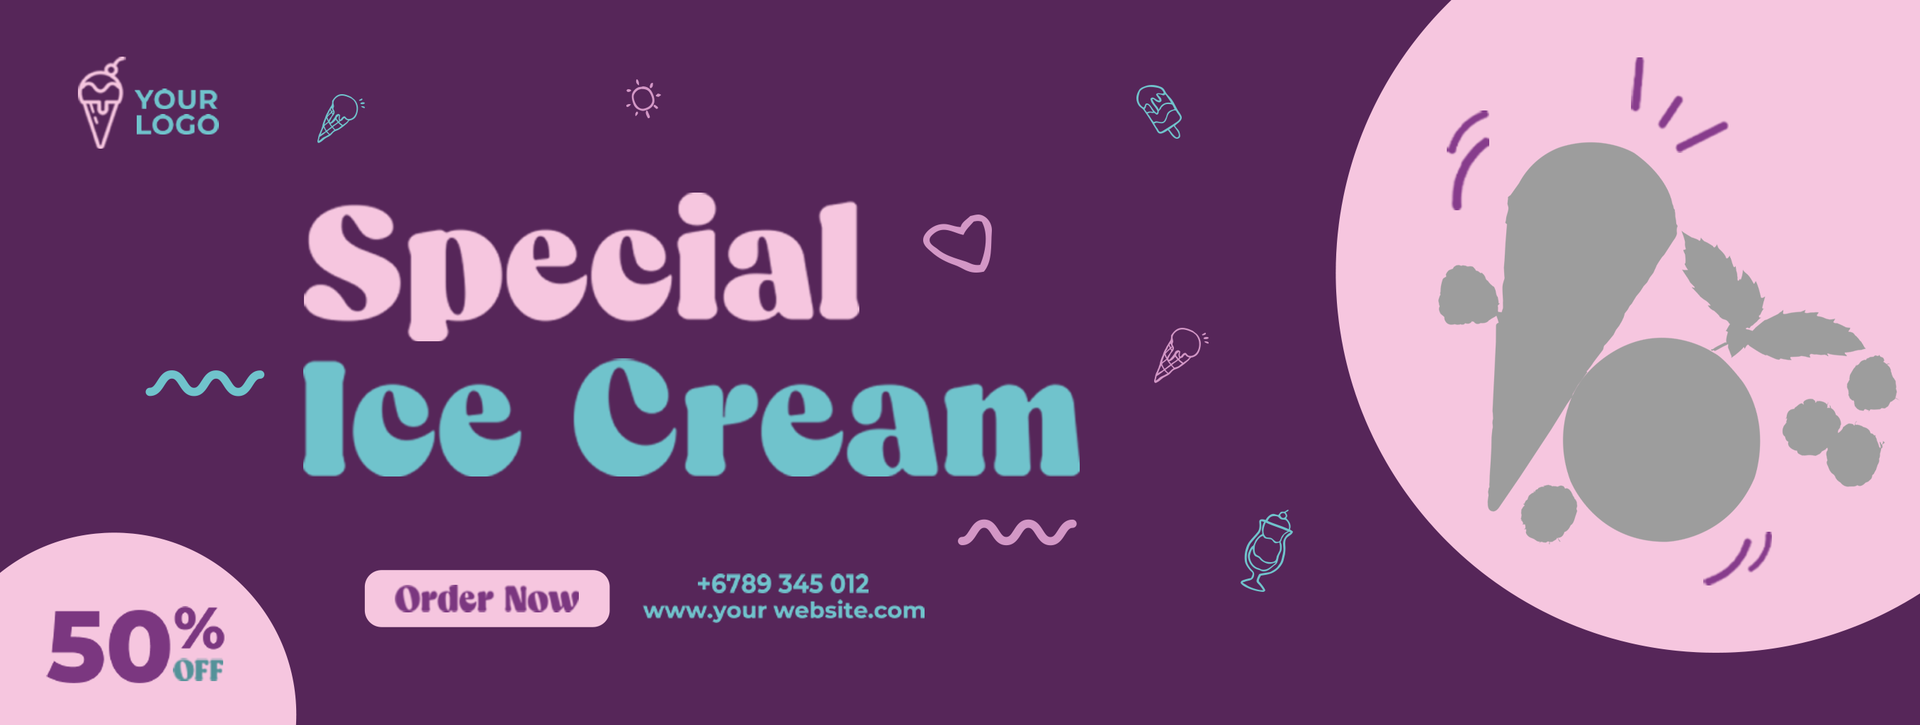 Tasty strawberry ice cream cone banner ads with fresh fruit and syrup in 3d illustration psd